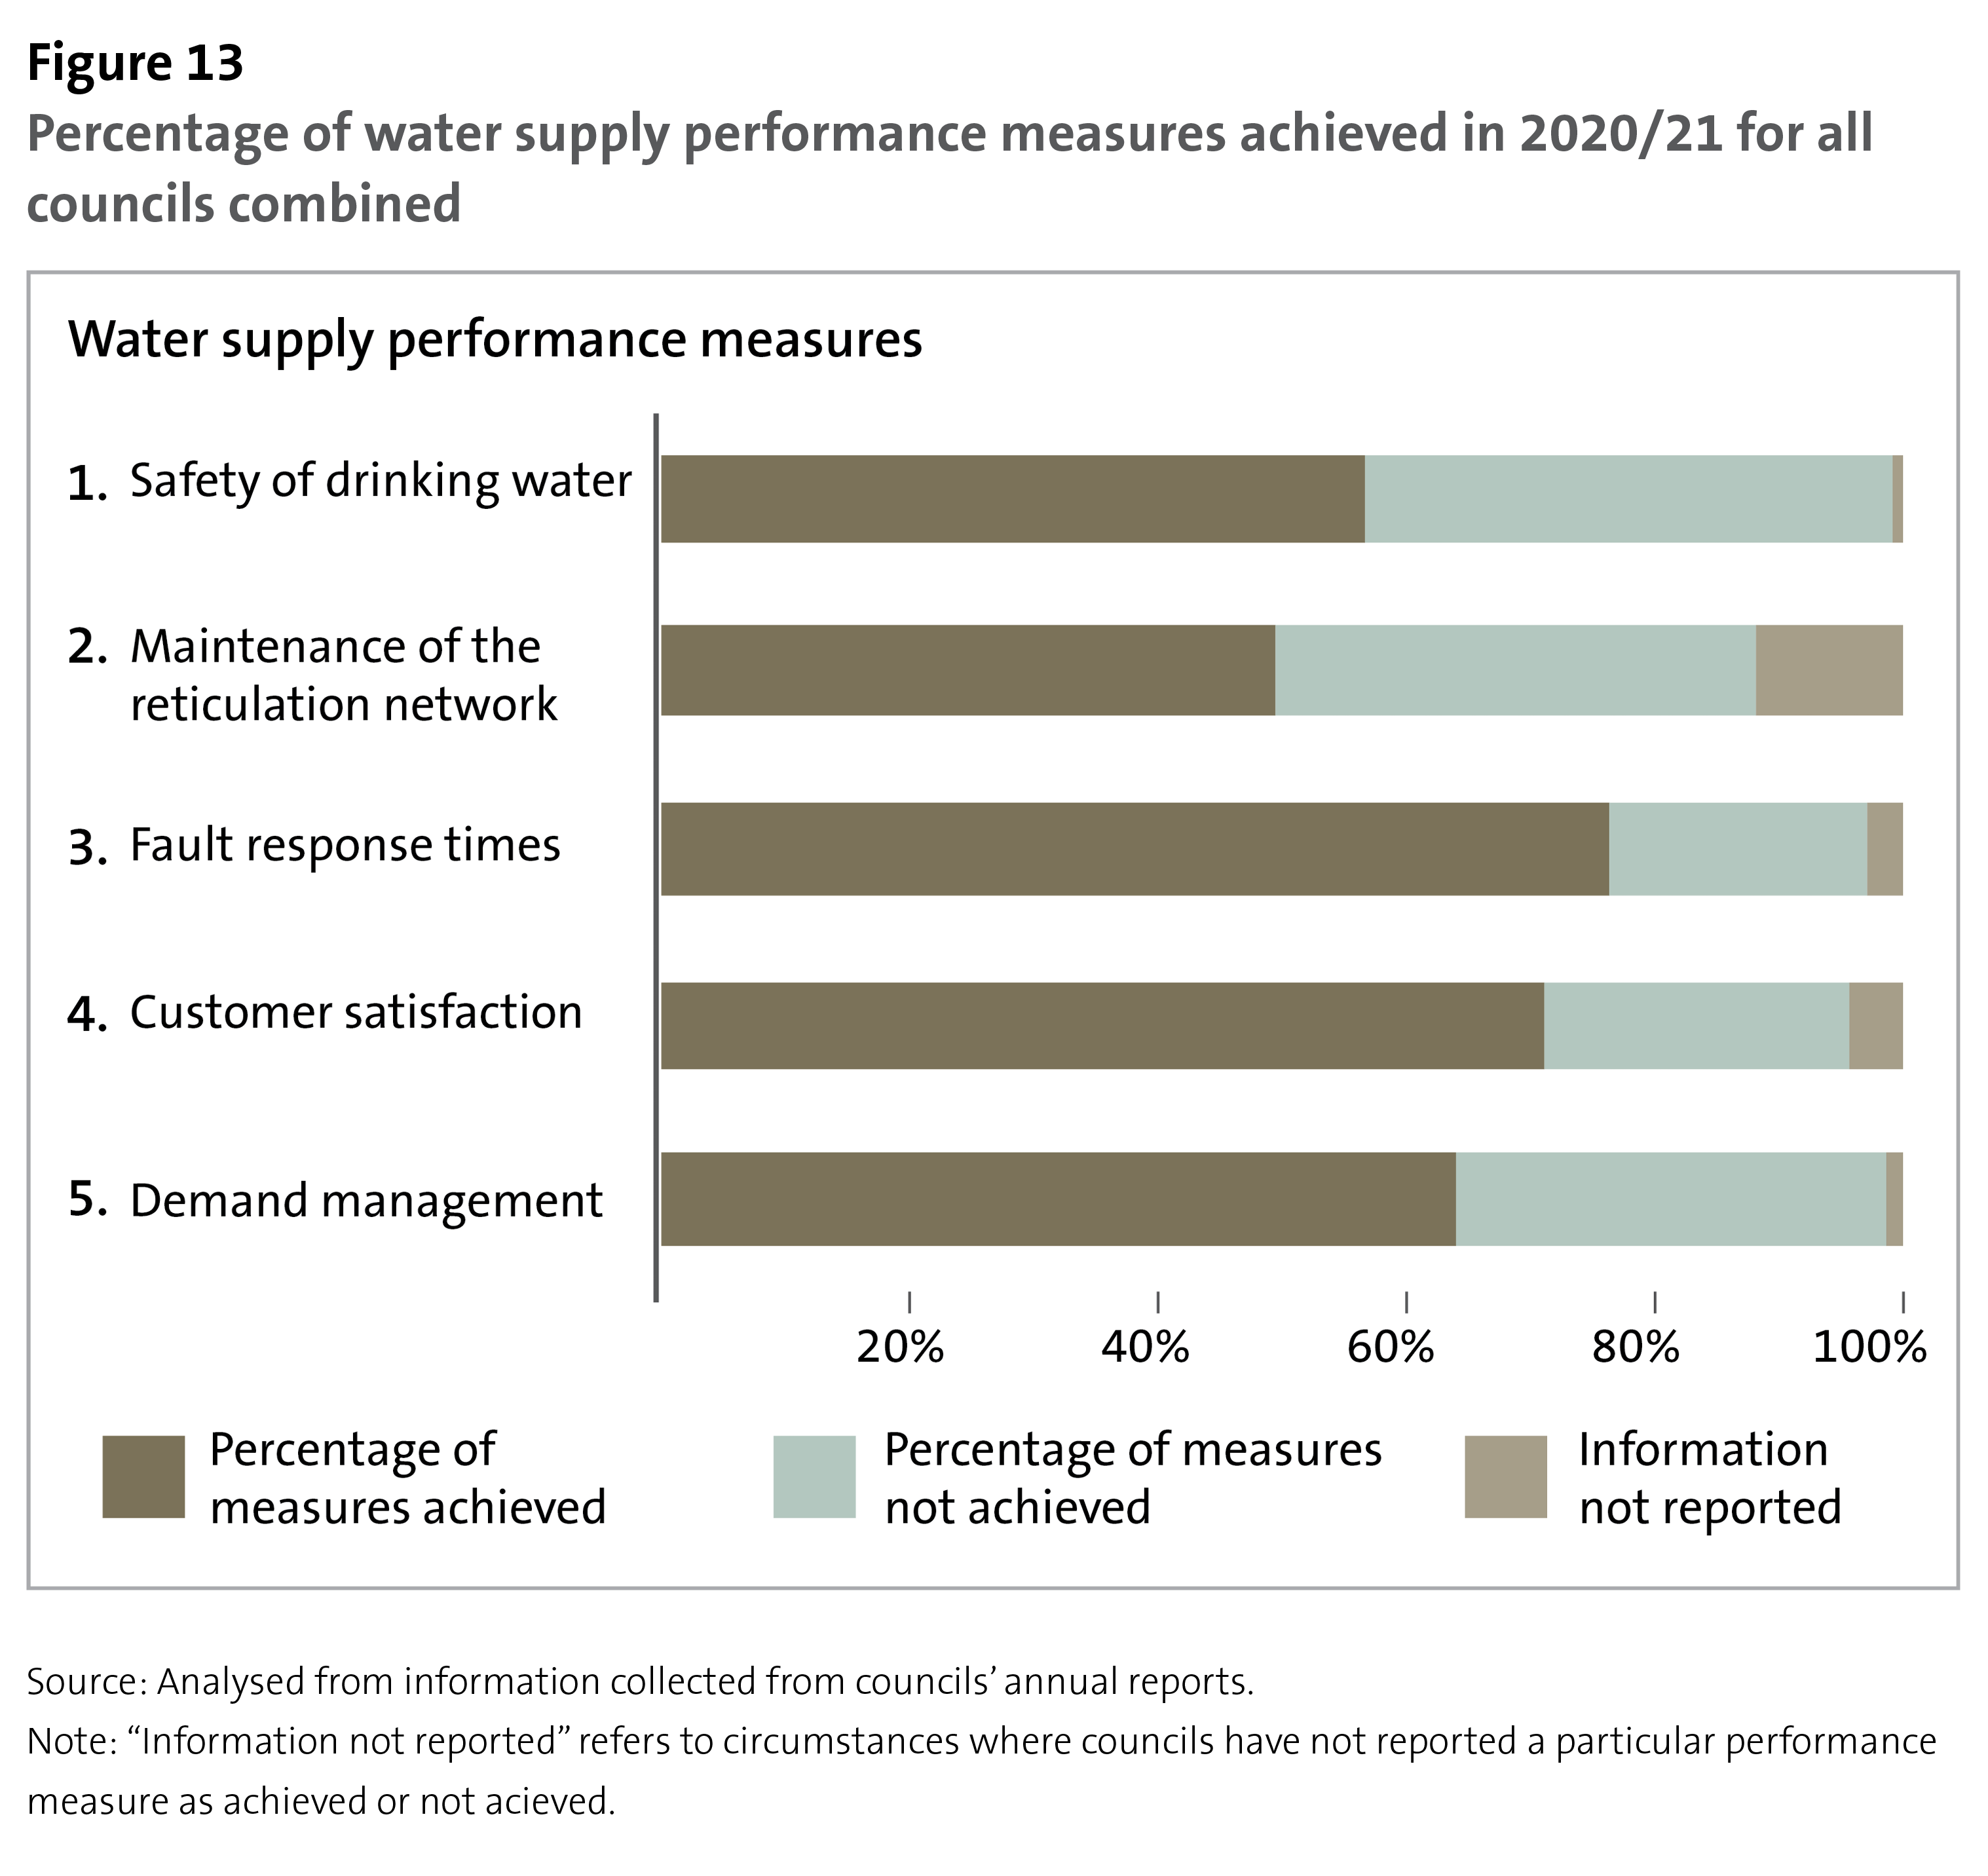 Figure 13 - Percentage of water supply performance measures achieved in 2020/21 for all councils combined